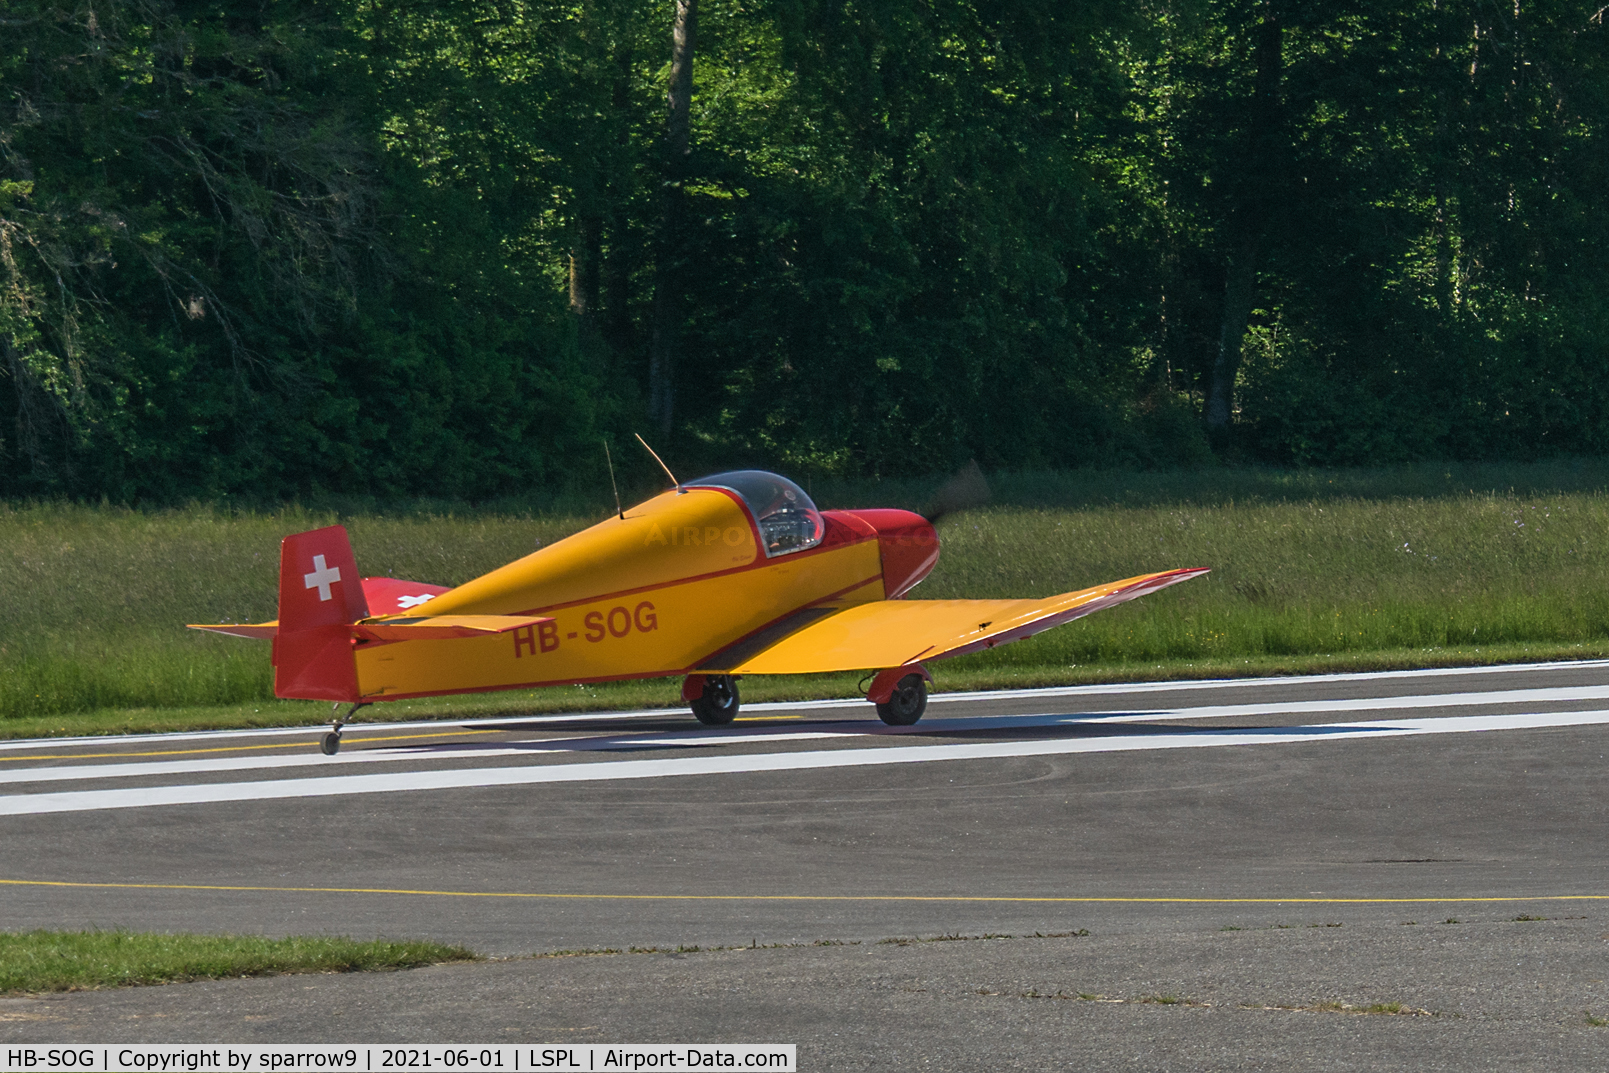 HB-SOG, 1958 Jodel D-112 C/N 490, At Langenthal-Bleienbach, taking-off to the east